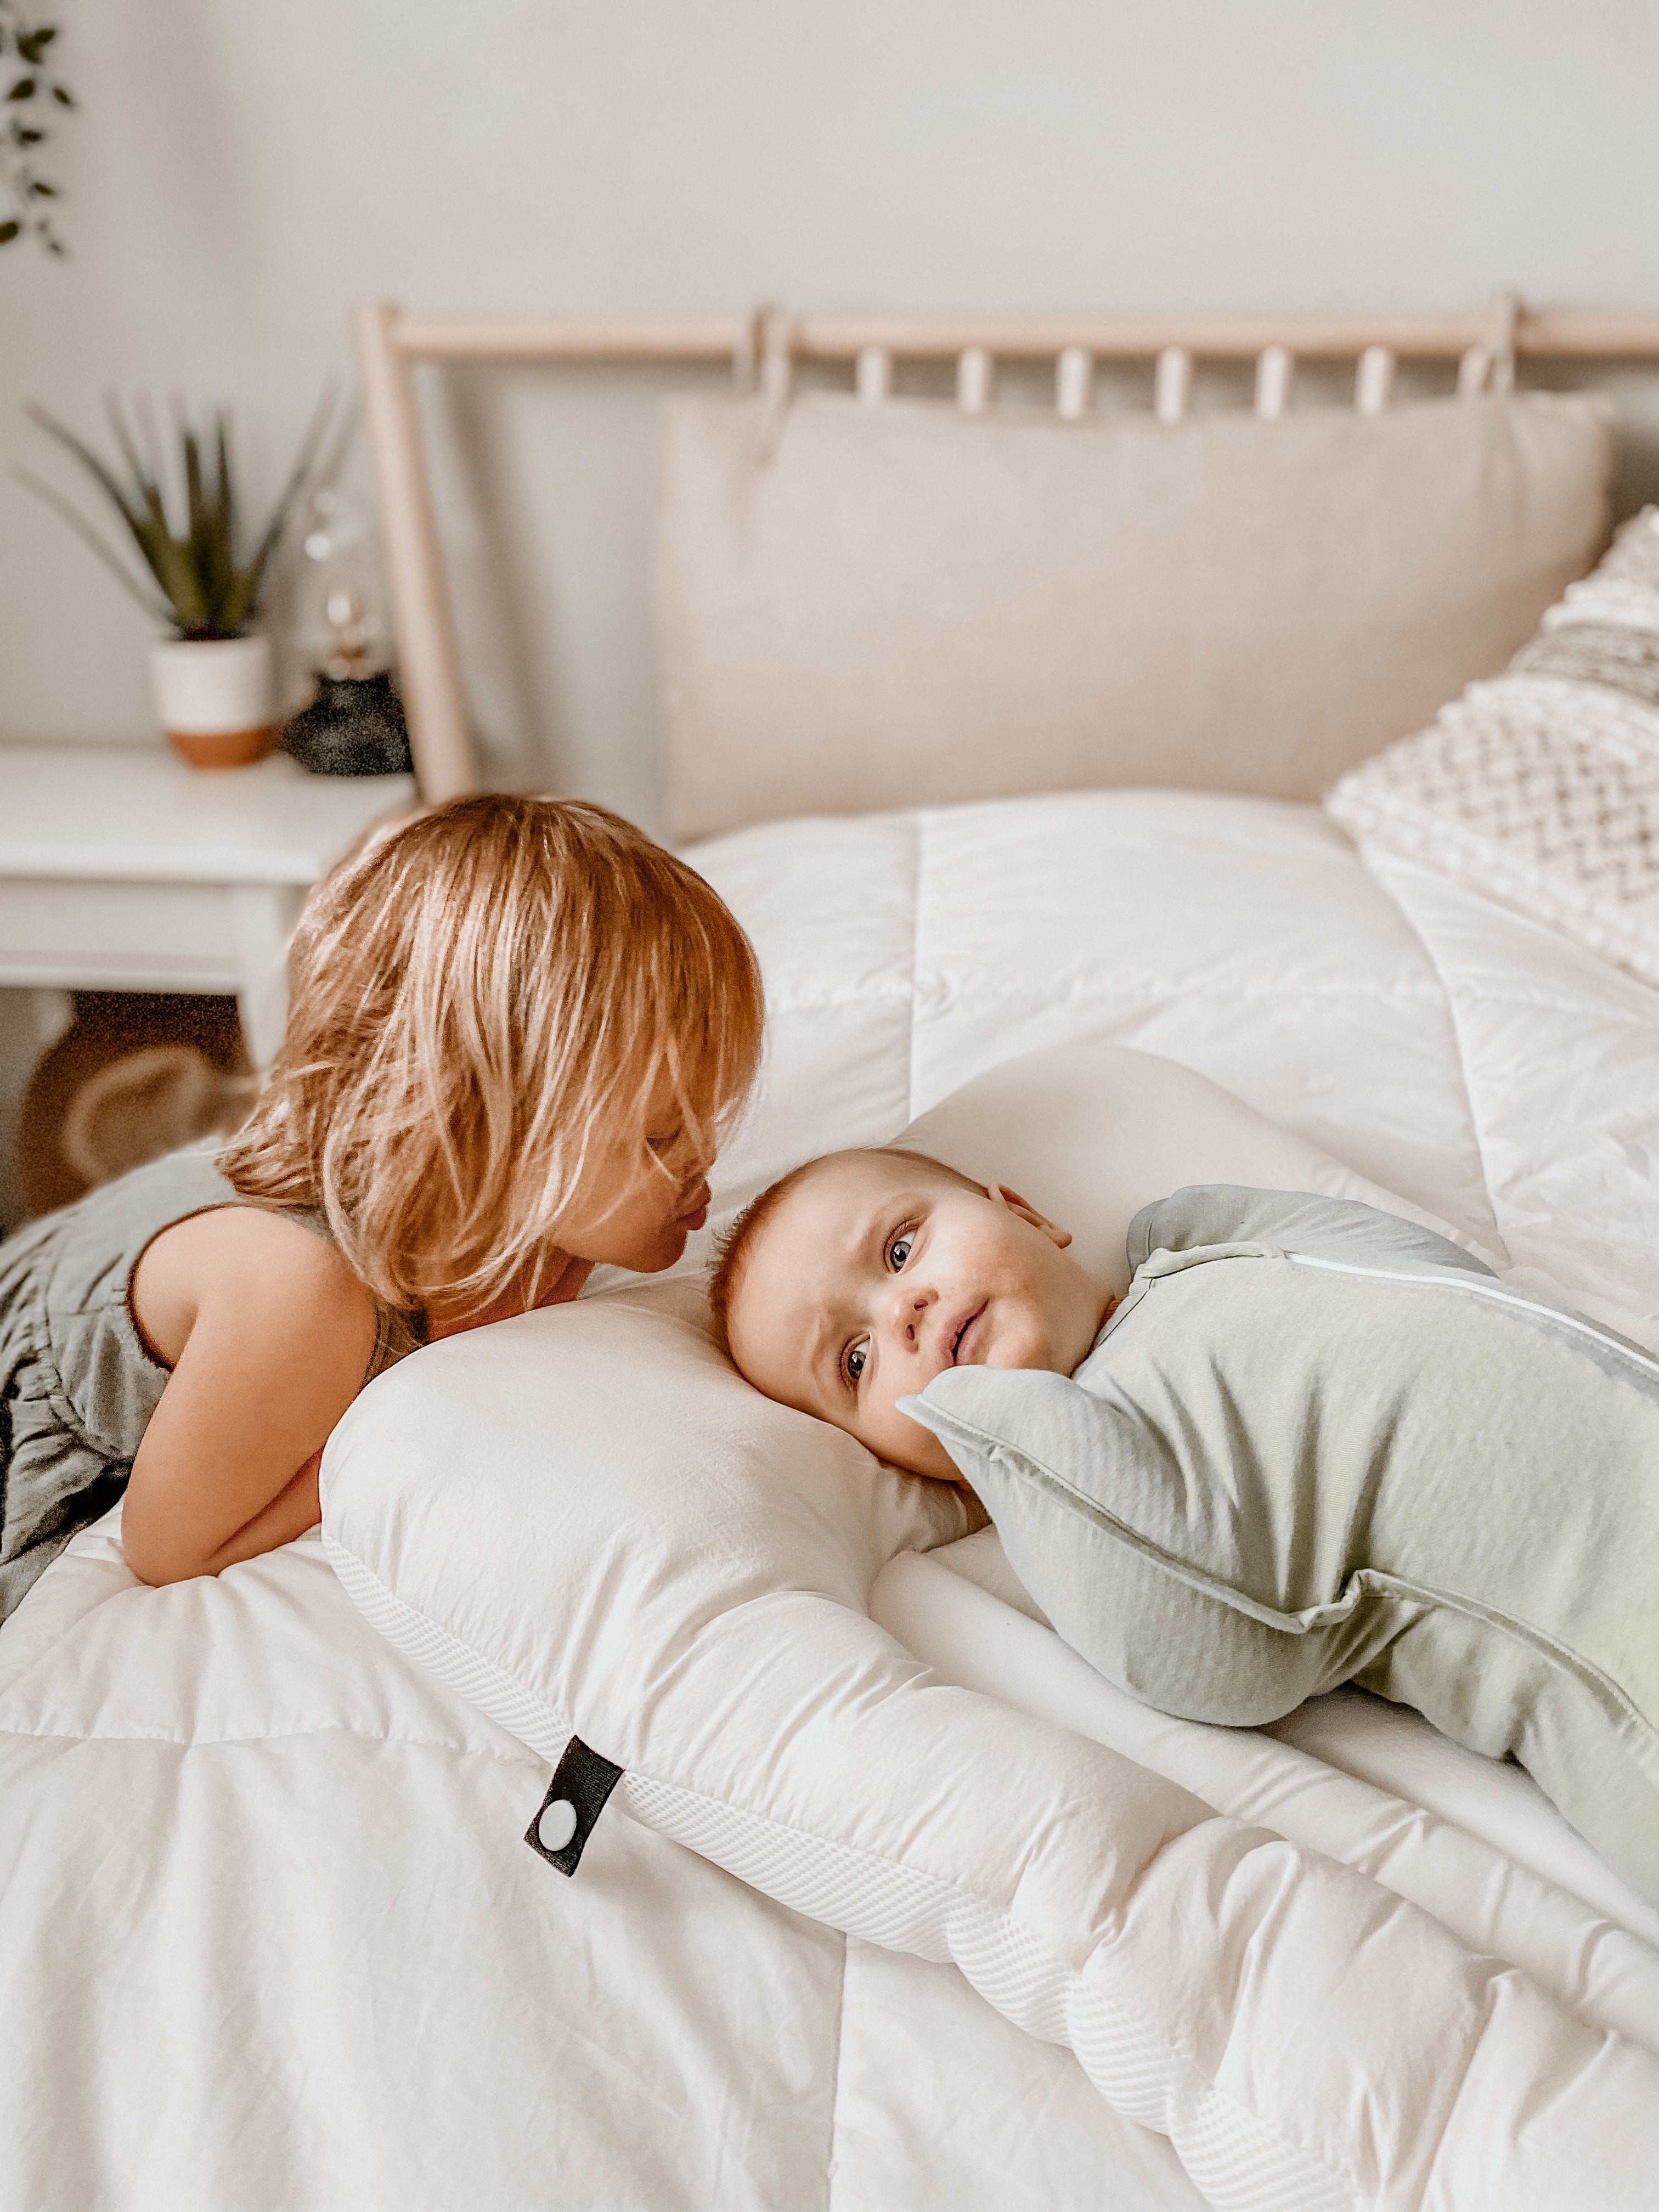 A little girl kissing her baby brother. The brother is wearing a swaddle and lying on a baby mattress or relaxer.